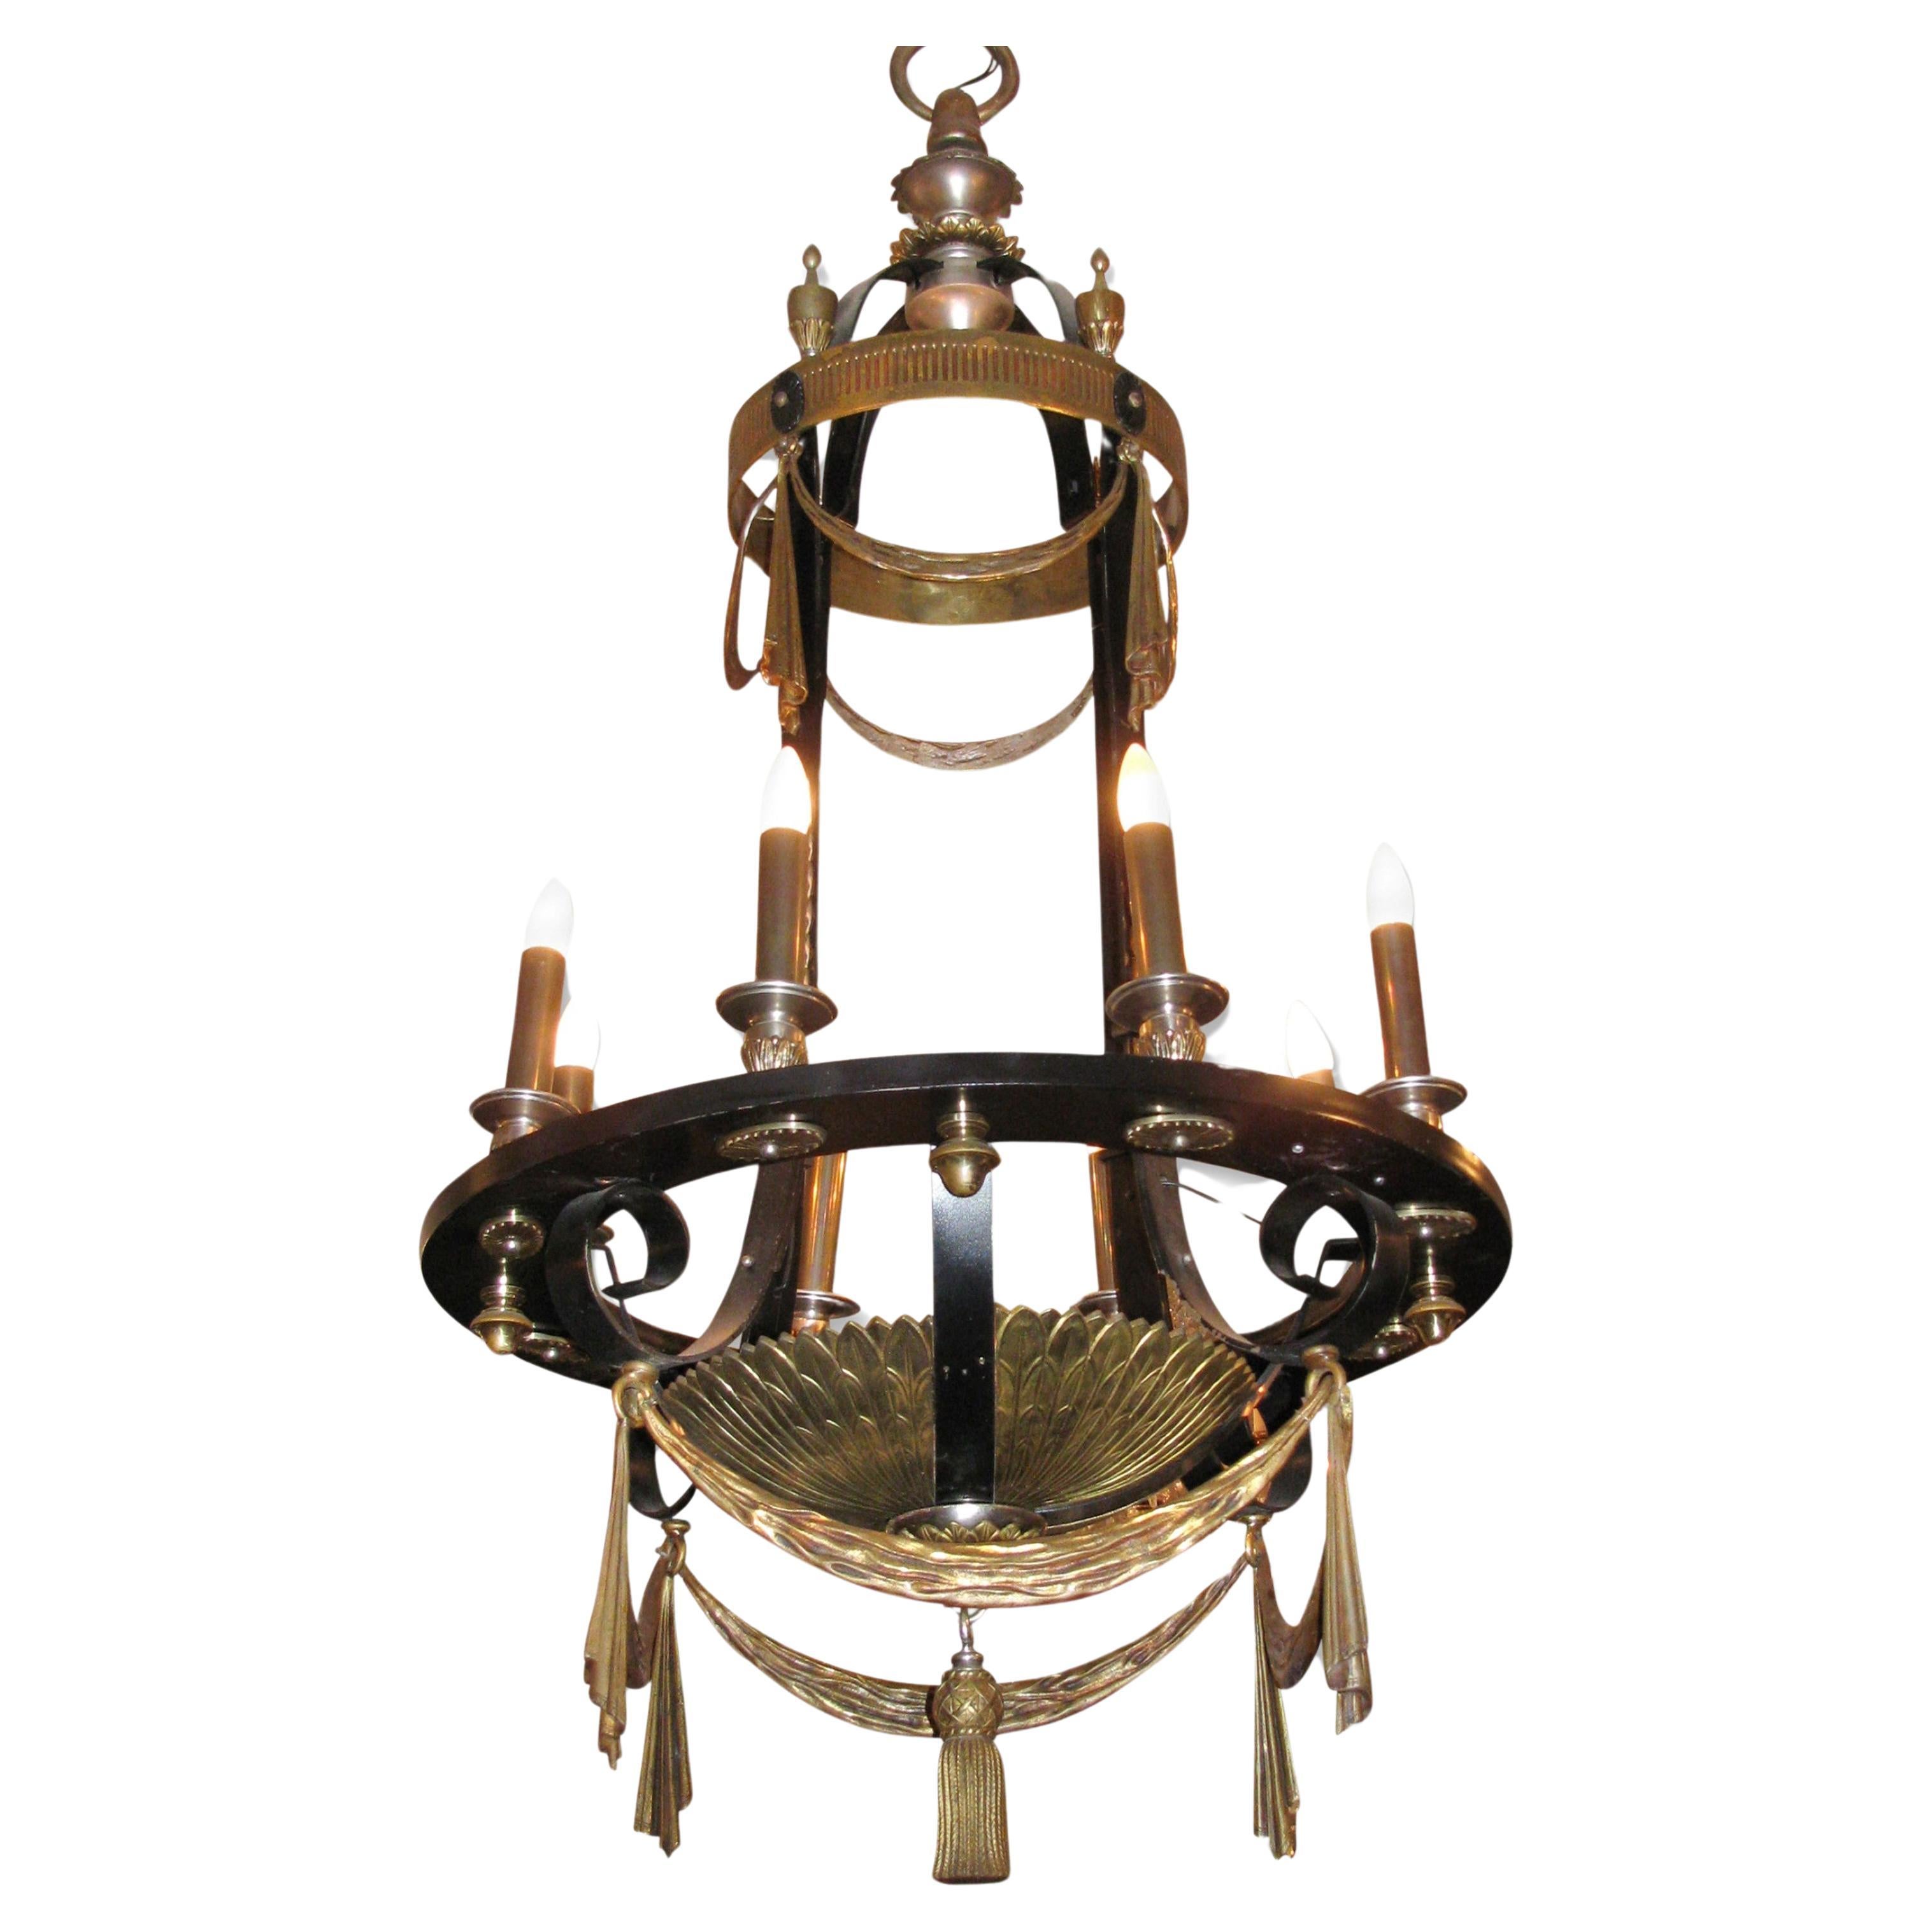 Large scale French Regency Caldwell steel and bronze eight arm fixture reclaimed from the Old Stone Bank in Providence, RI. Cleaned and restored. The price includes restoration of cleaning and rewiring. Please note, this item is located in one of